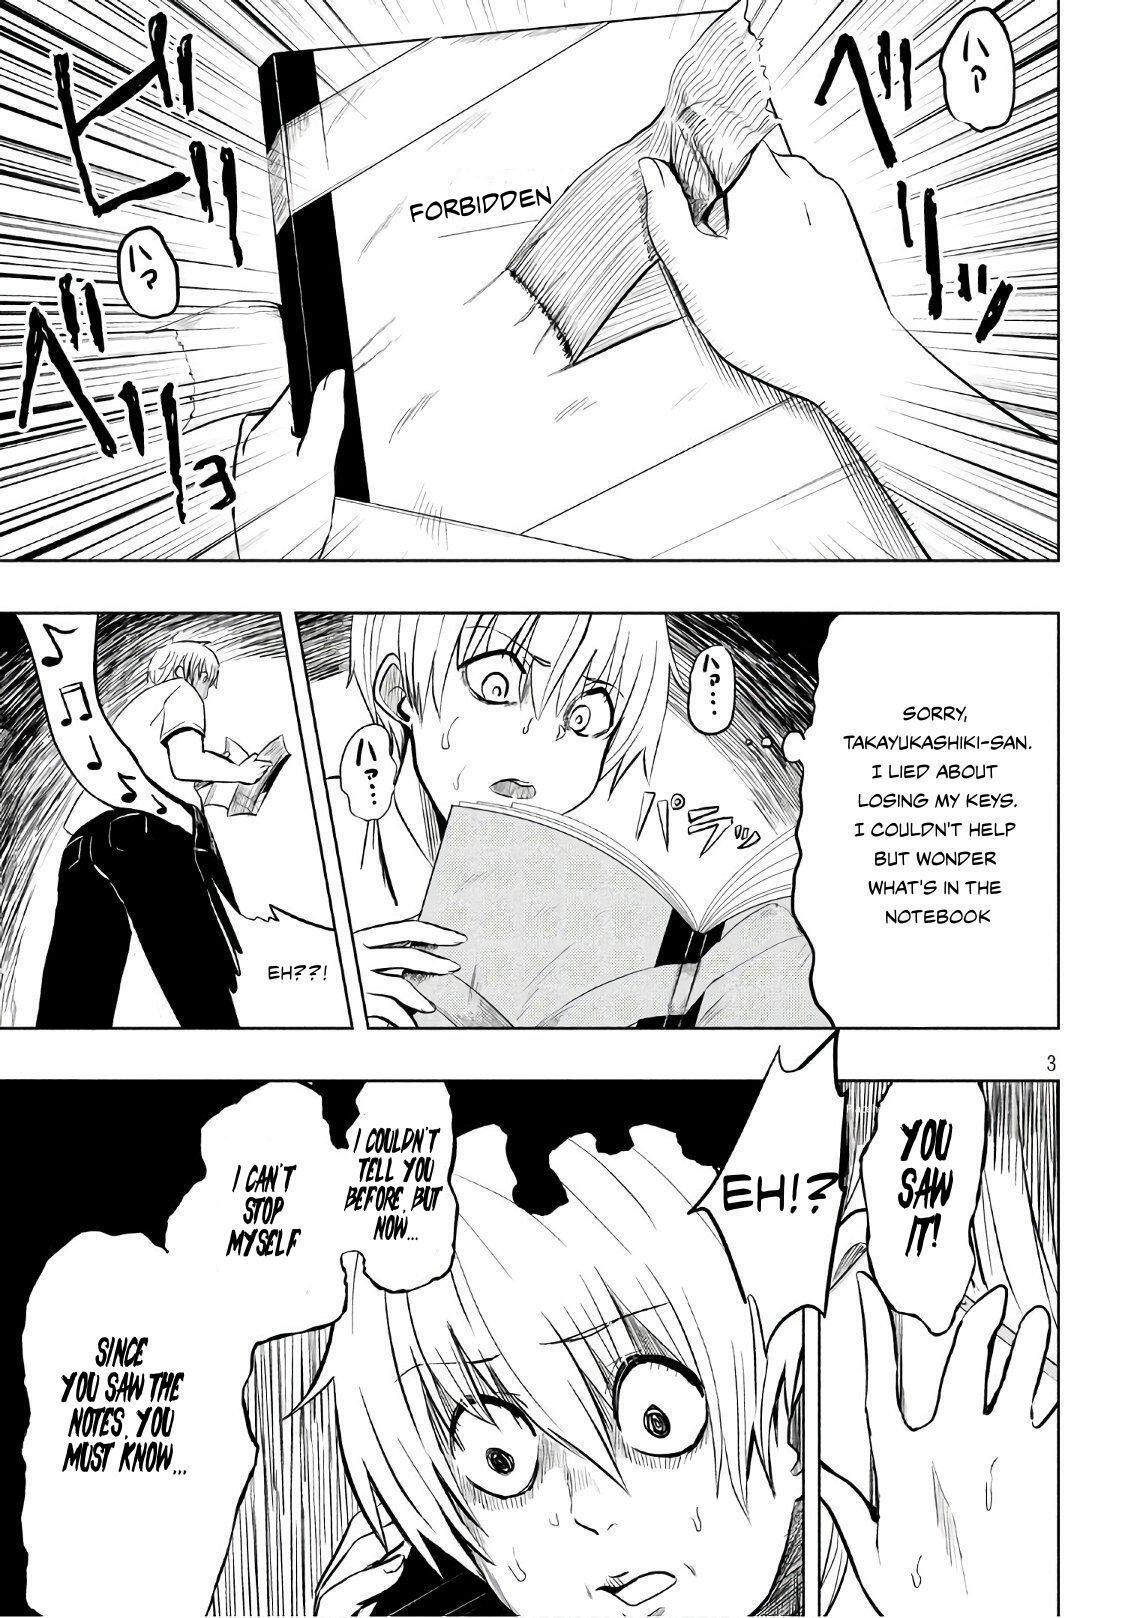 A Girl Who Is Very Well-Informed About Weird Knowledge, Takayukashiki Souko-San Chapter 26: Test Of Courage page 3 - Mangakakalots.com